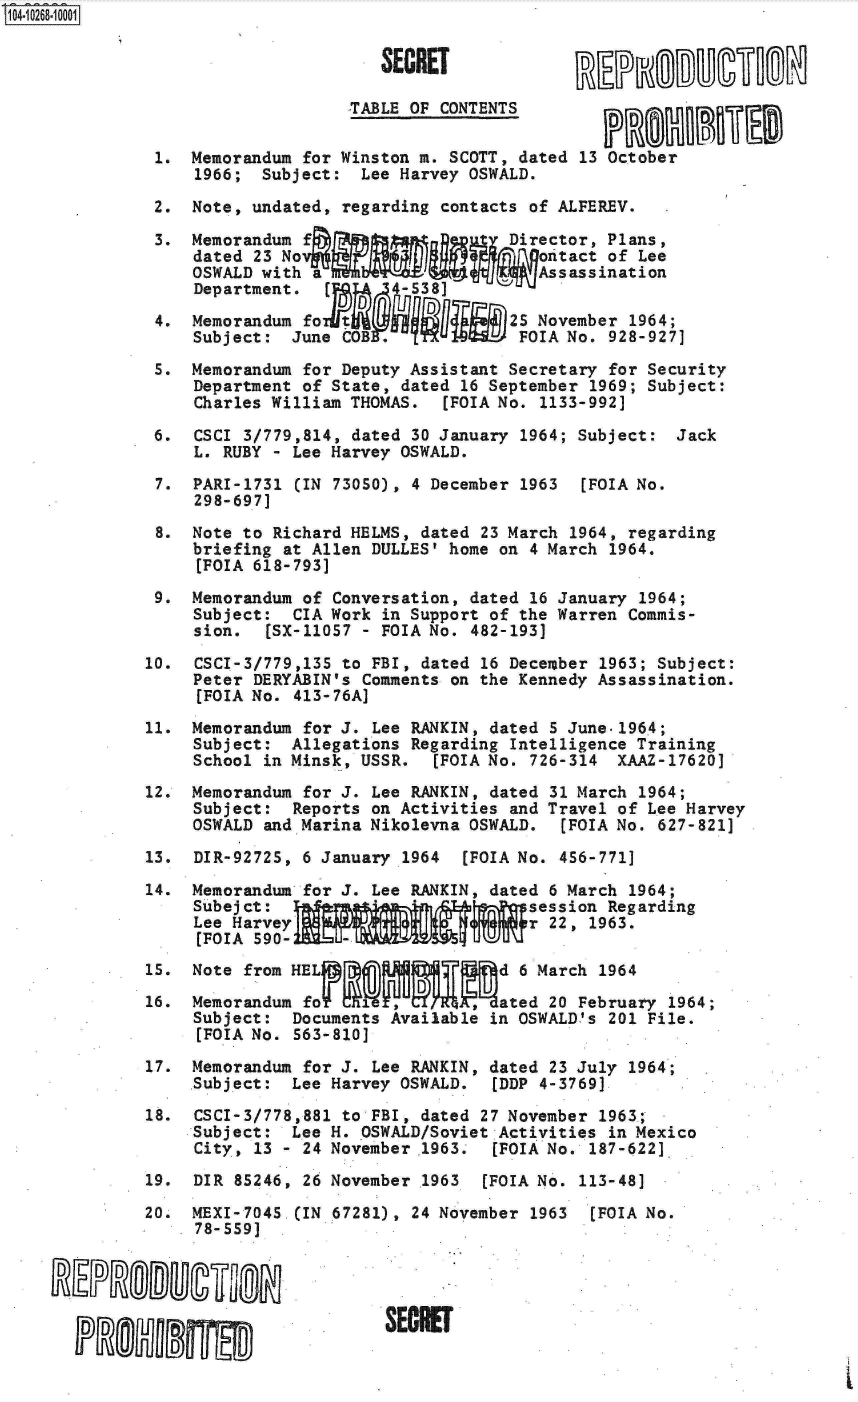 handle is hein.jfk/jfkarch01206 and id is 1 raw text is: 104-10268-10001


                                     SECRET               EERUDJ 10H

                                  TABLE OF CONTENTS


               1. Memorandum  for Winston m. SCOTT, dated 13 October
                   1966; Subject:  Lee Harvey OSWALD.

               2. Note, undated, regarding contacts of ALFEREV.

               3. Memorandum  f                   Director, Plans,
                   dated 23 No 4                     ontact of Lee
                   OSWALD with a                     Assassination
                   Department.  (     4-538]

               4. Memorandum  fo                  25 November 1964;
                   Subject: June COB  .            POIA No. 928-9271

               5. Memorandum  for Deputy Assistant Secretary for Security
                   Department of State, dated 16 September 1969; Subject:
                   Charles William THOMAS.  [FOIA No. 1133-992]

               6.  CSCI 3/779,814, dated 30 January 1964; Subject: Jack
                   L. RUBY - Lee Harvey OSWALD.

               7.  PARI-1731 (IN 73050), 4 December 1963 [FOIA No.
                   298-697]

               8. Note  to Richard HELMS, dated 23 March 1964, regarding
                   briefing at Allen DULLES' home on 4 March 1964.
                   [FOIA 618-793]

               9. Memorandum  of Conversation, dated 16 January 1964;
                   Subject:  CIA Work in Support of the Warren Commis-
                   sion.  [SX-11057 - FOIA No. 482-193]

              10.  CSCI-3/779,135 to FBI, dated 16 December 1963; Subject:
                   Peter DERYABIN's Comments on the Kennedy Assassination.
                   [FOIA No. 413-76A]

              11. Memorandum  for J. Lee RANKIN, dated 5 June.1964;
                   Subject: Allegations Regarding Intelligence Training
                   School in Minsk, USSR.  [FOIA No. 726-314 XAAZ-17620]

              12. Memorandum  for J. Lee RANKIN, dated 31 March 1964;
                   Subject: Reports on Activities and Travel of Lee Harvey
                   OSWALD and Marina Nikolevna OSWALD. [FOIA No. 627-821]

              13.  DIR-92725, 6 January 1964  [FOIA No. 456-771]

              14. Memorandum  for J. Lee RANKIN, dated 6 March 1964;
                   Subejct:          'session Regarding
                   Lee Harvey                       r 22, 1963.
                   [F0IA 590-N     m
              15. Note  from HEL                 d 6 March 1964

              16. Memorandum  fo       ,      ,5 M ated 20 February 1964;
                   Subject: Documents Available in OSWALD's 201 File.
                   [FOIA No. 563-810]

              17. Memorandum  for J. Lee RANKIN, dated 23 July 1964;
                   Subject: Lee Harvey OSWALD.  [DDP 4-3769]

              18.  CSCI-3/778,881 to FBI, dated 27 November 1963.;
                  Subject:  Lee H. OSWALD/Soviet Activities in Mexico
                  City,  13 - 24 November 1963. [FOIA No. 187-622]

              19.  DIR 85246, 26 November 1963 [FOIA No. 113-48]

              20. MEXI-7045.(IN 67281), 24 November 1963  [FOIA No.
                   78-559]




                ESECE


